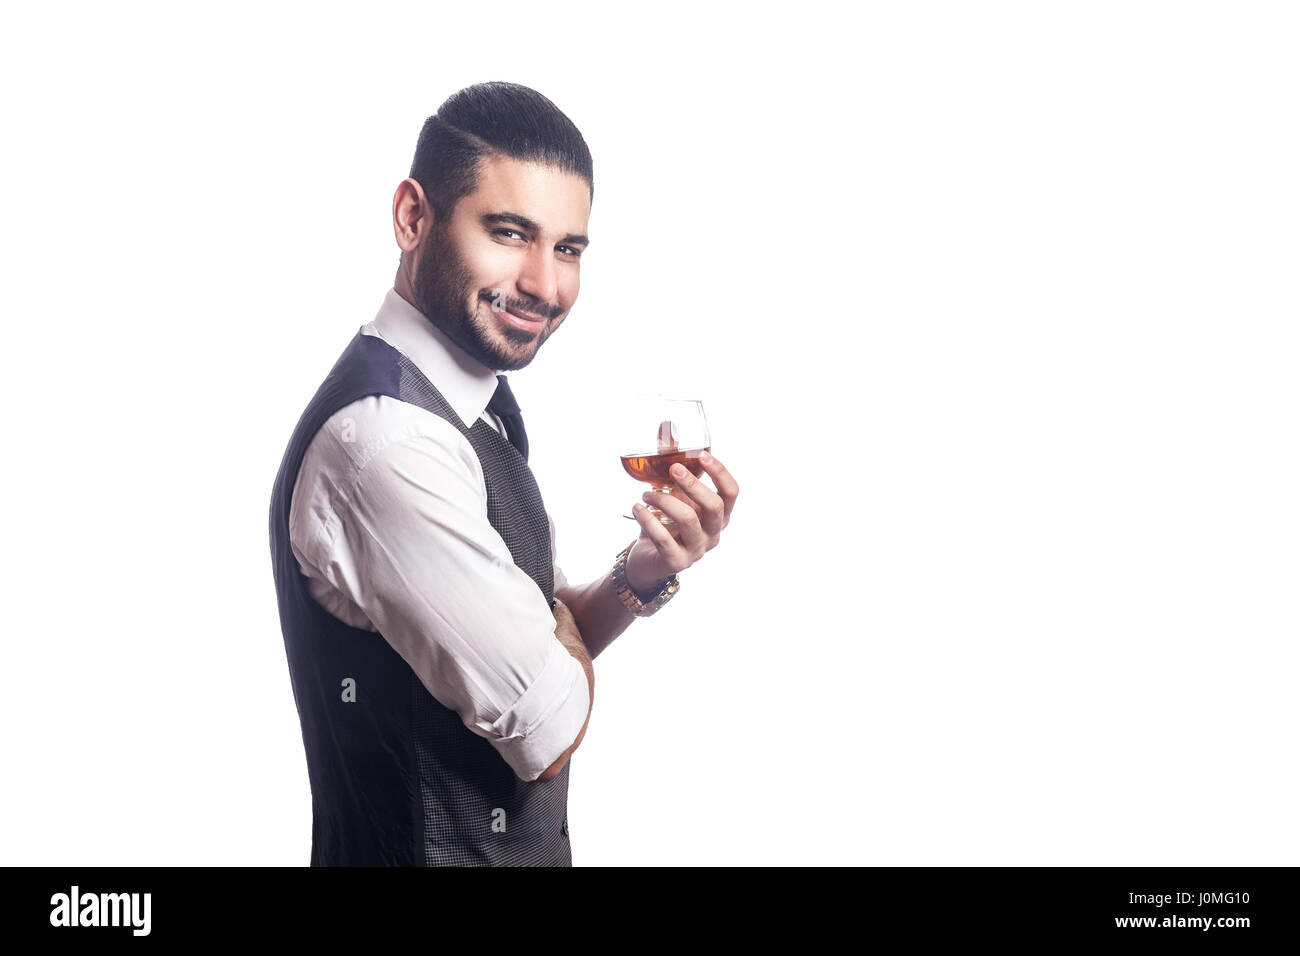 Beau bearded businessman holding a glass of whiskey. holding glass and looking at camera avec sourire. studio shot, isolé sur fond blanc. Banque D'Images